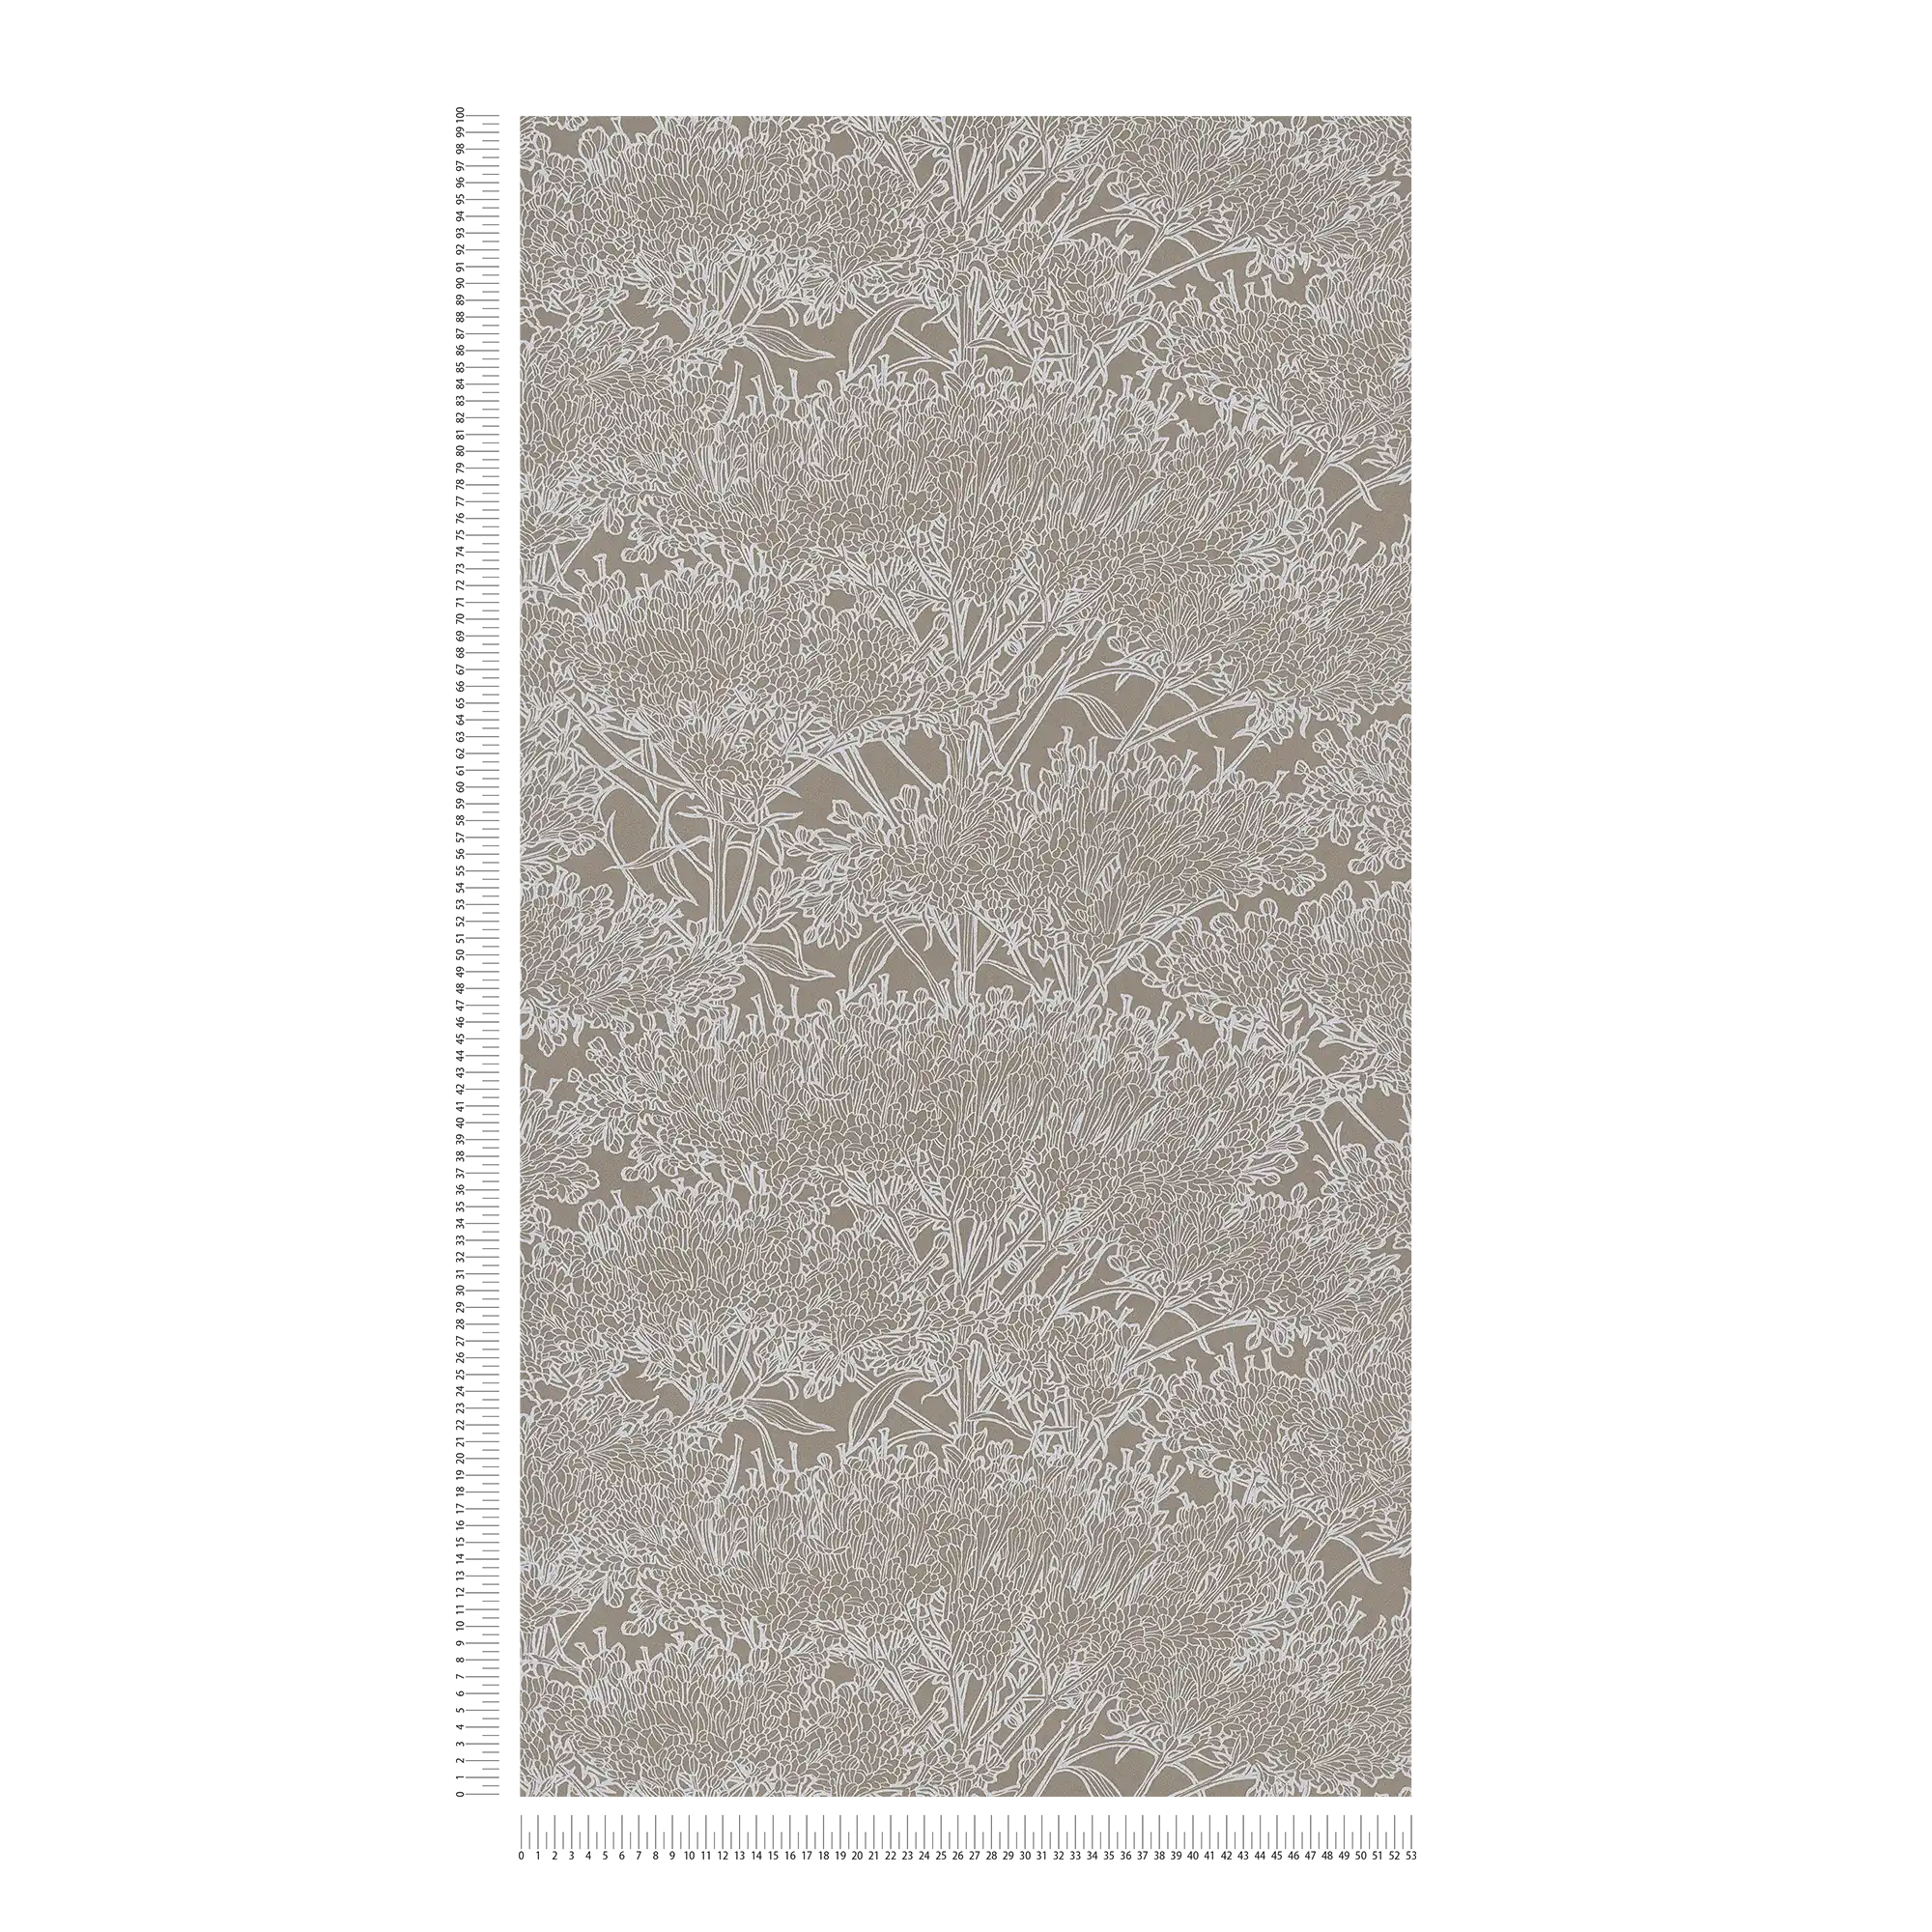             Floral wallpaper in grey with silver metallic effect - grey, silver
        